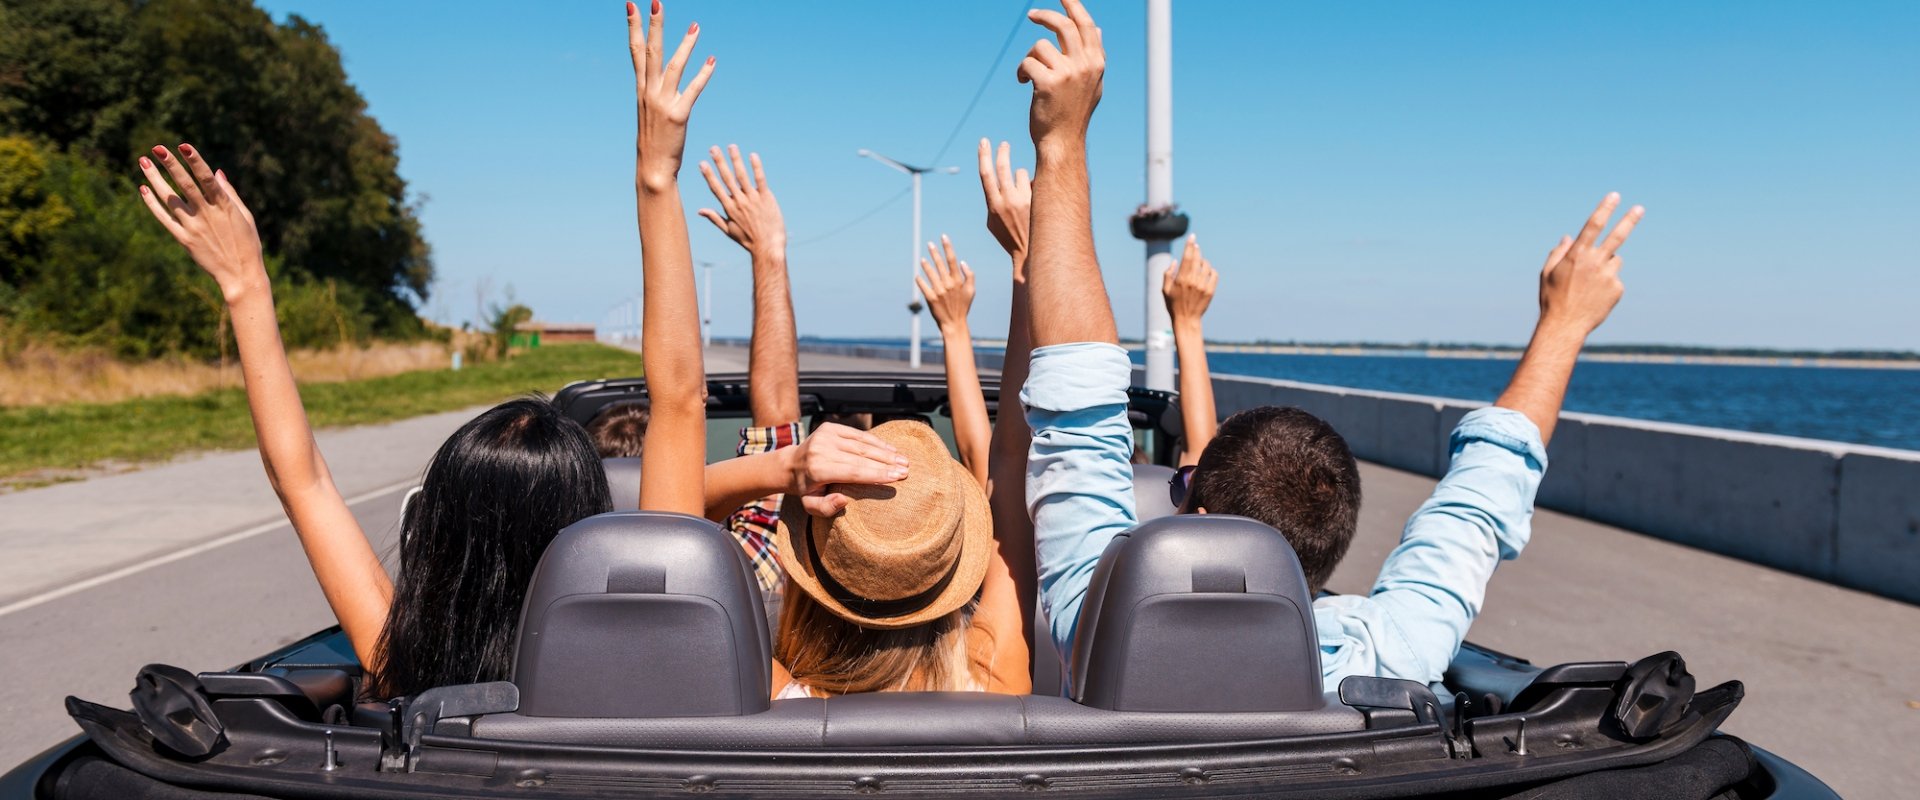 A group joyously throwing their hands up in the air while riding in a convertible